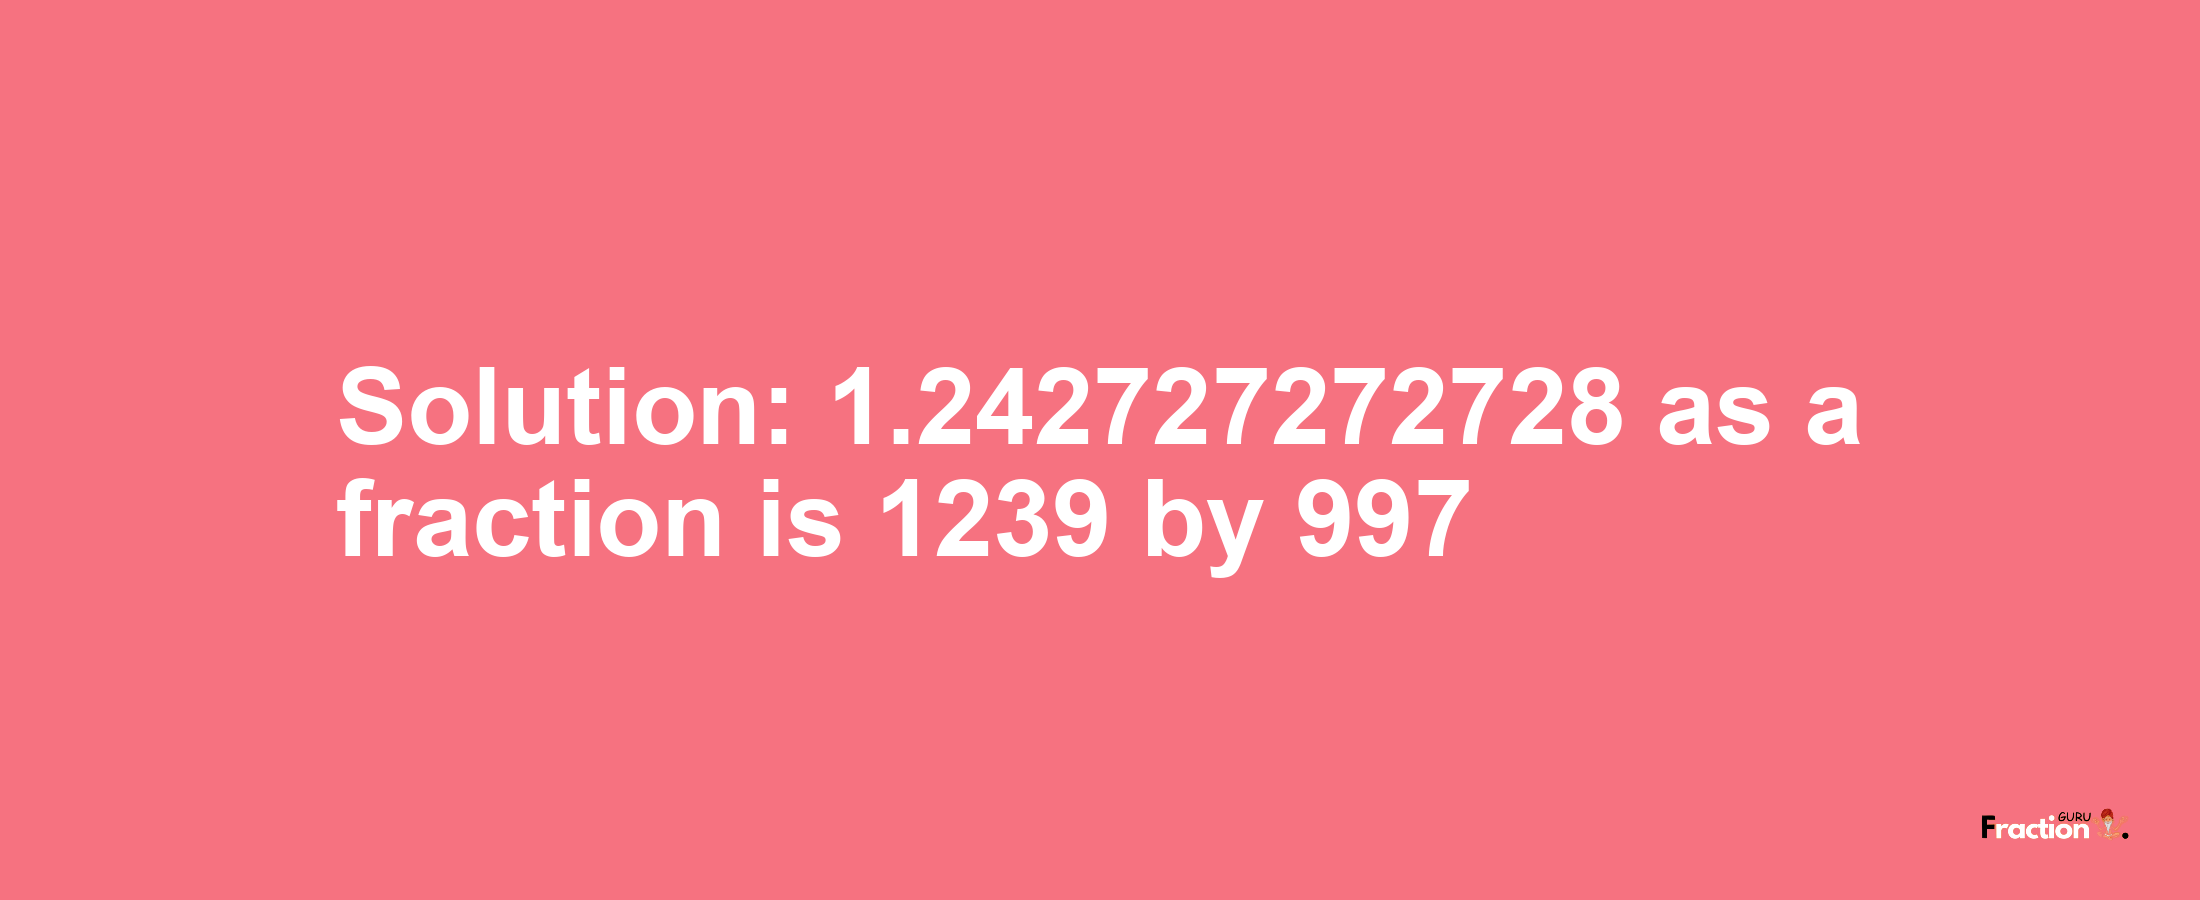 Solution:1.242727272728 as a fraction is 1239/997